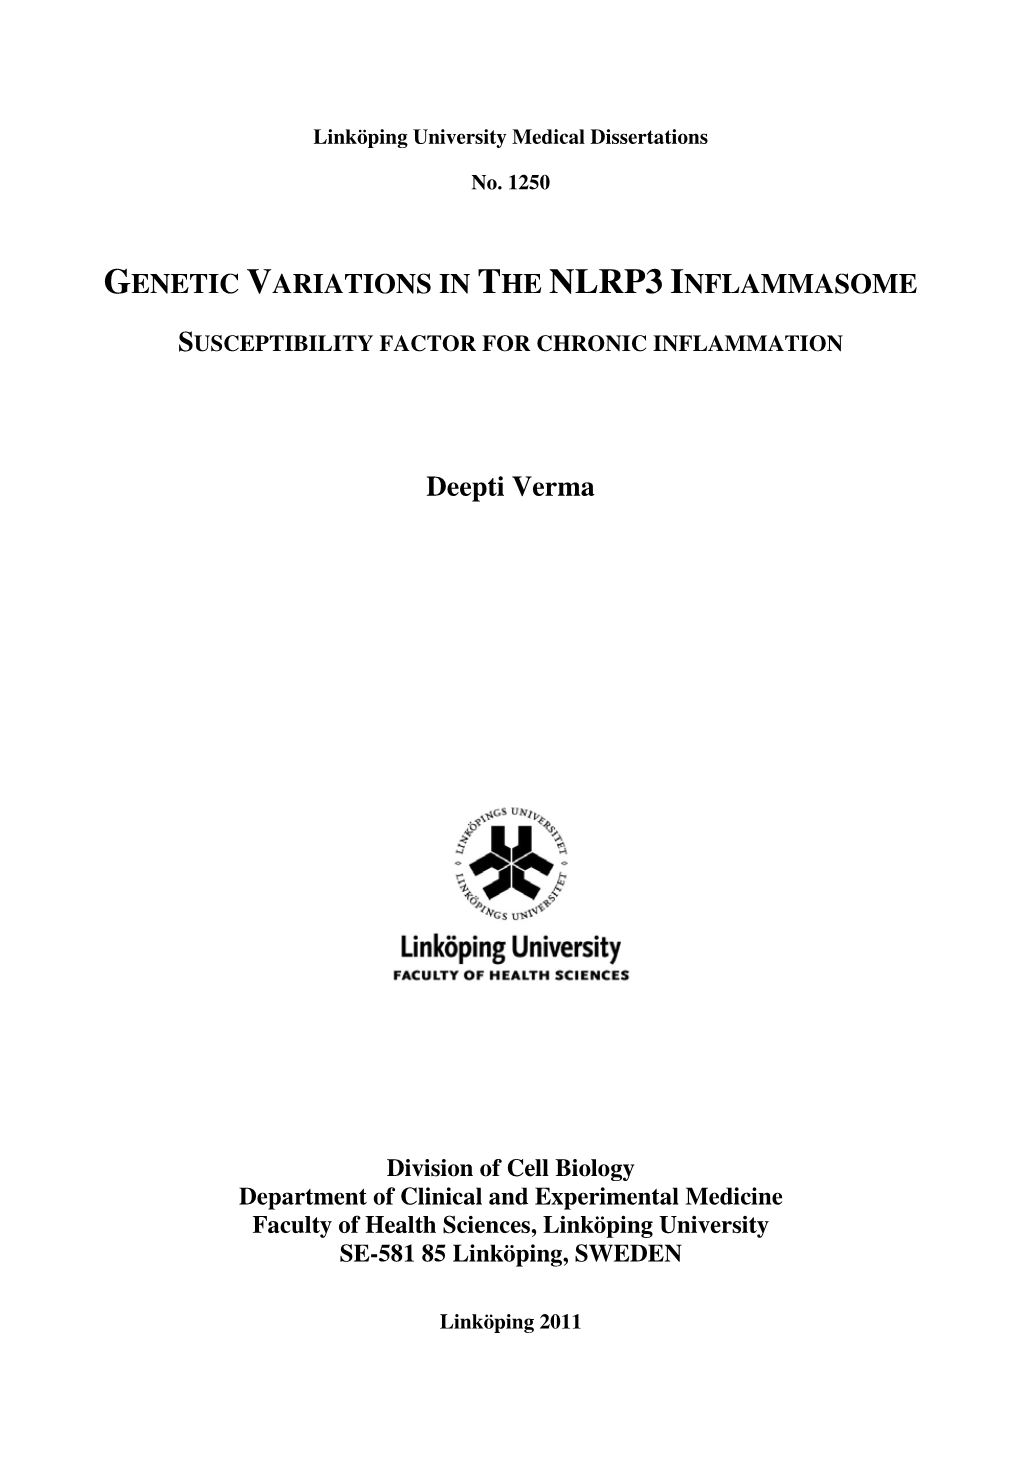 Genetic Variations in the Nlrp3 Inflammasome